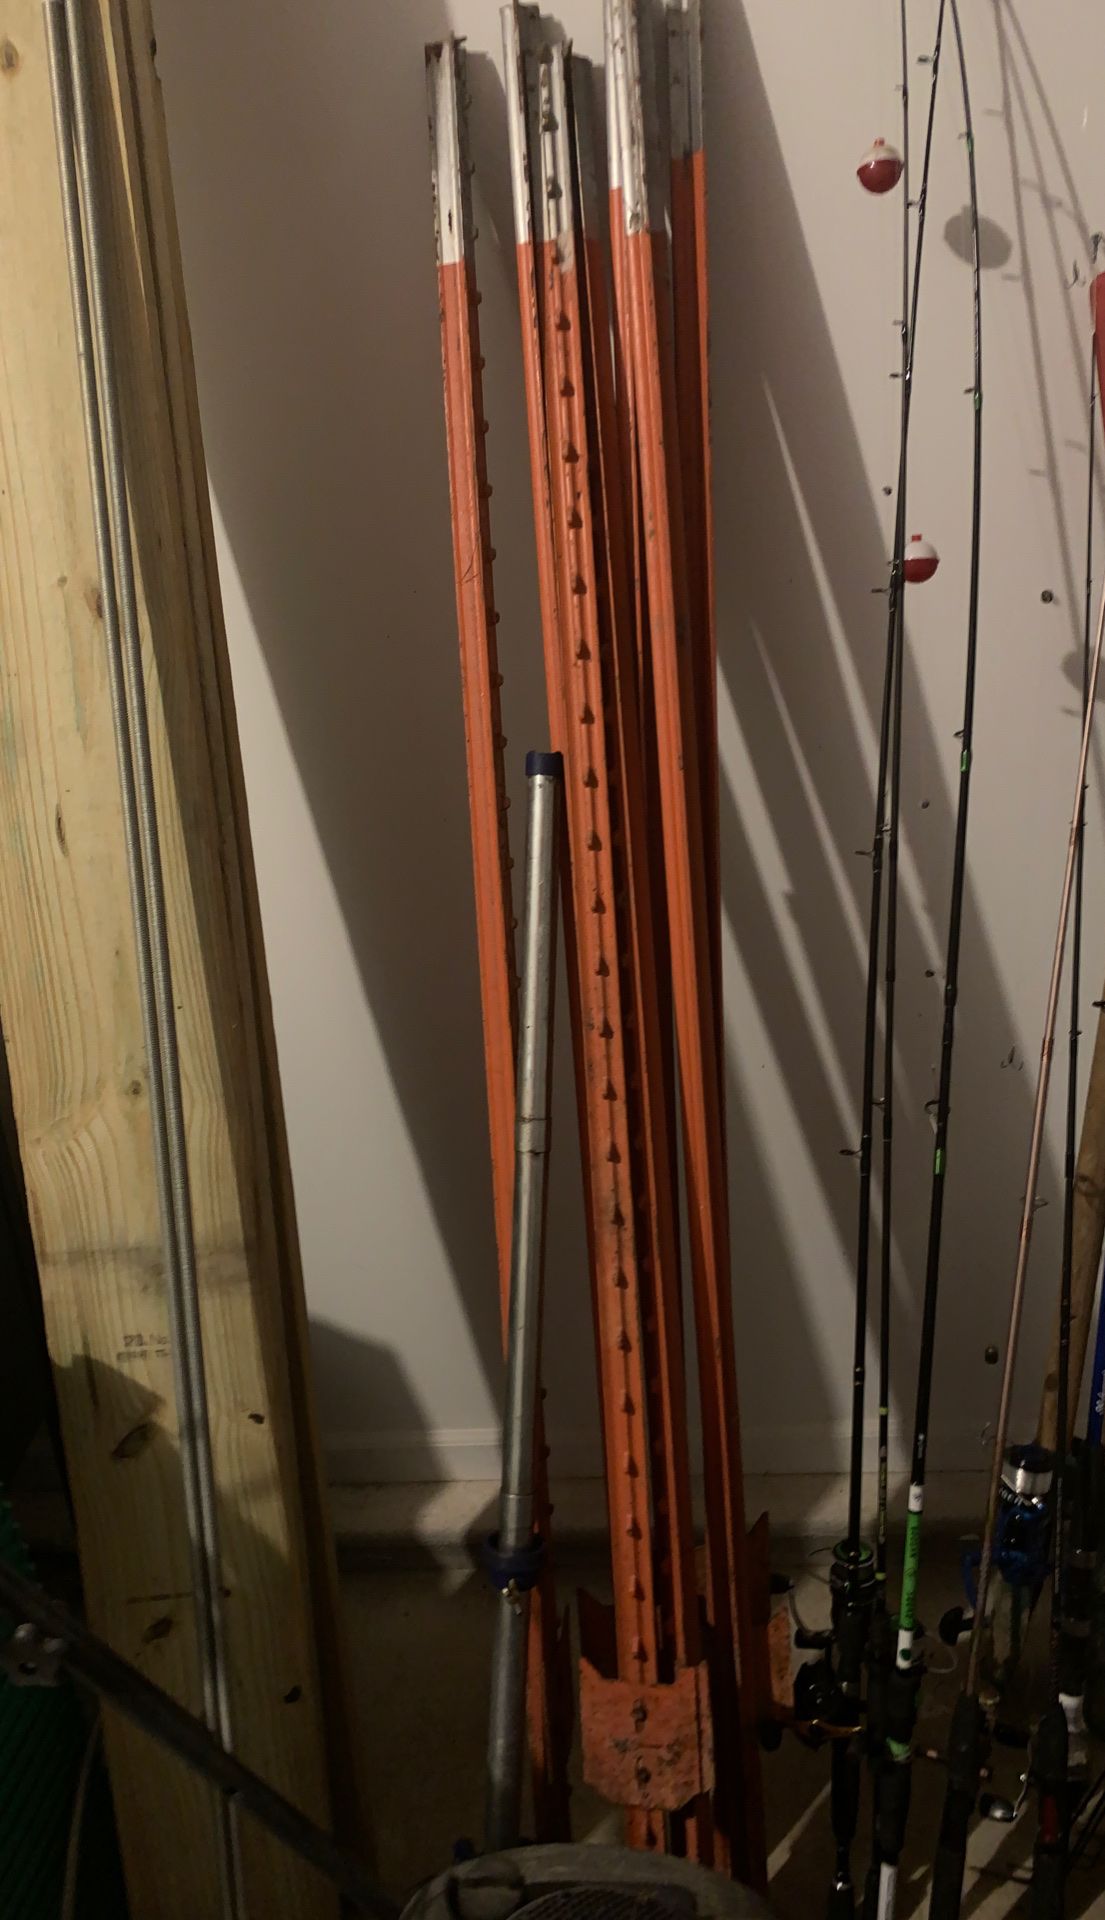 8ft long T post “7 of them total”